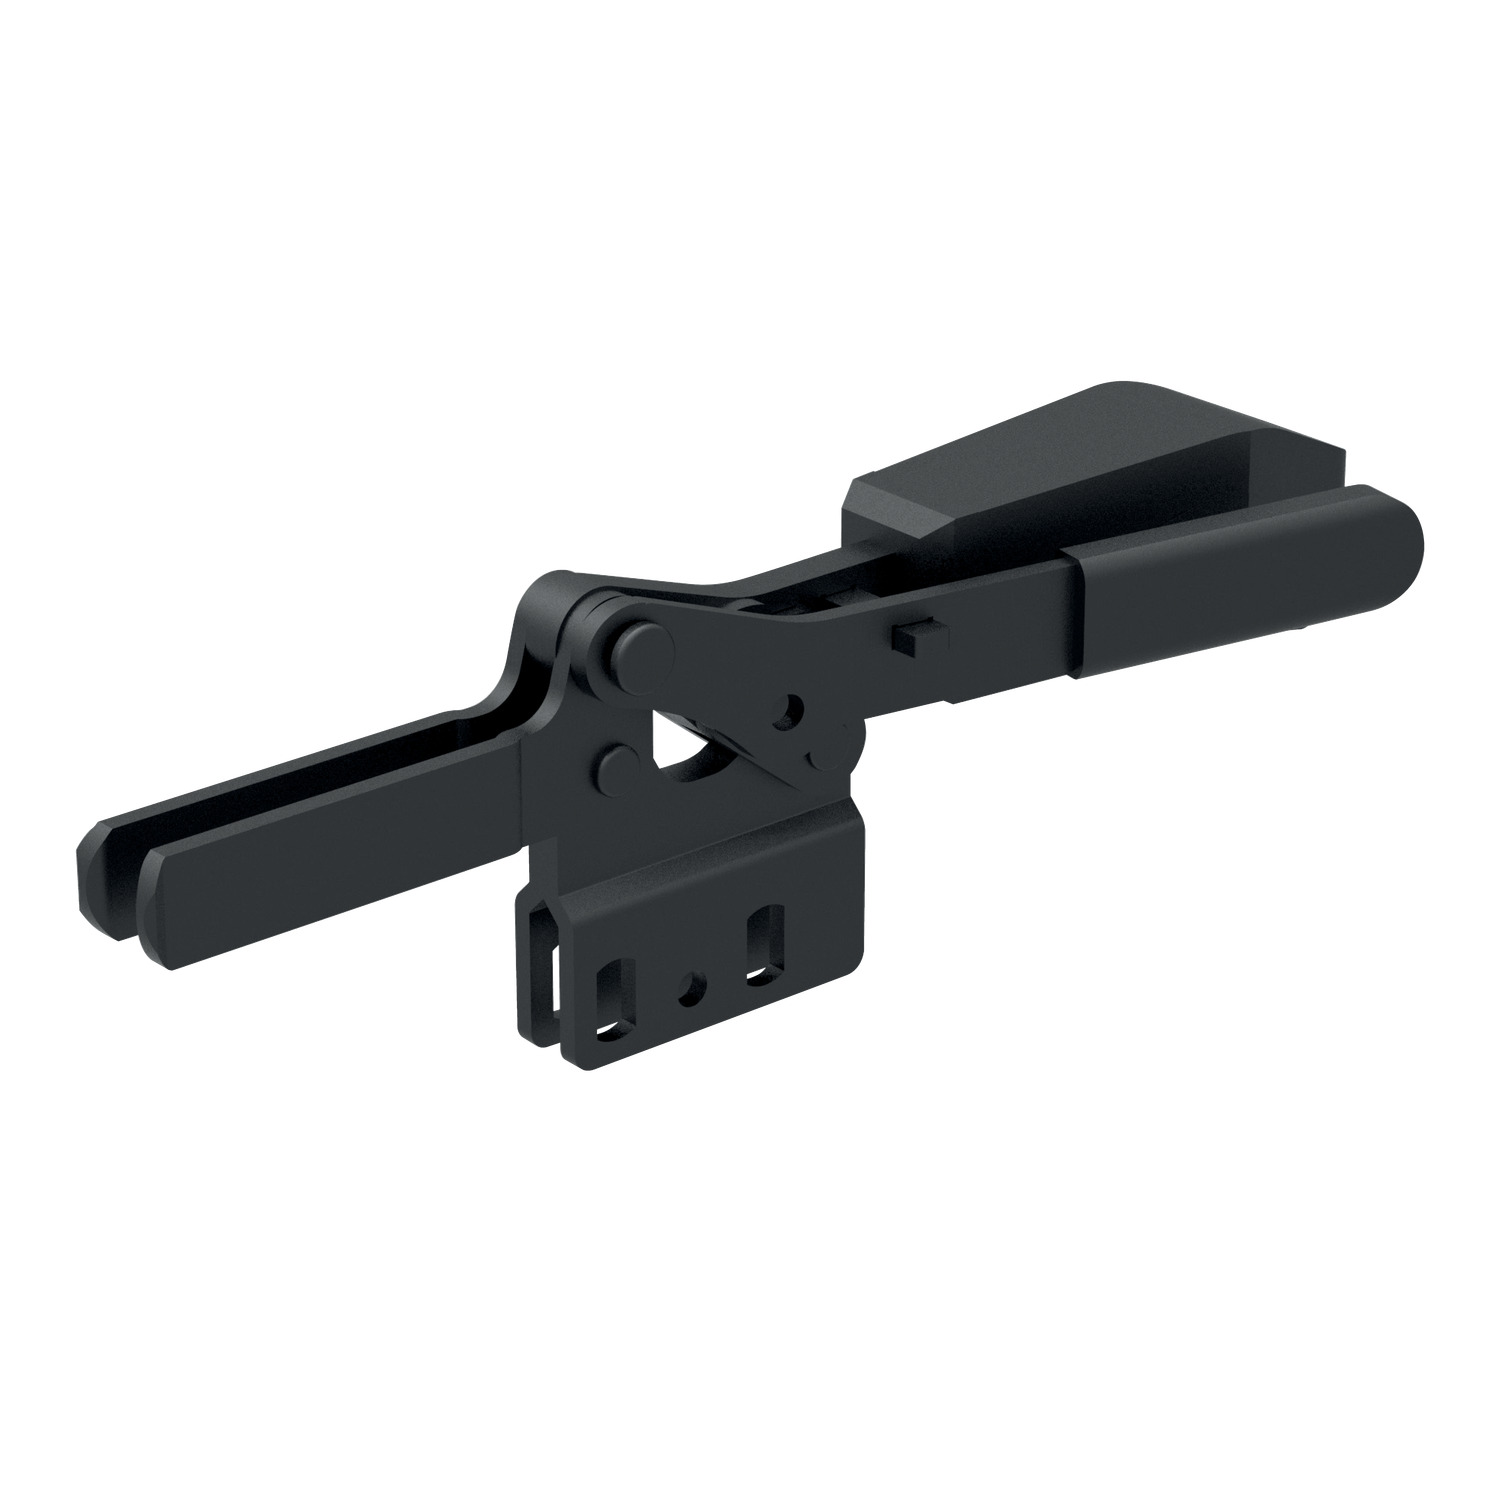 41064.2 - Horizontal Acting Toggle Clamps